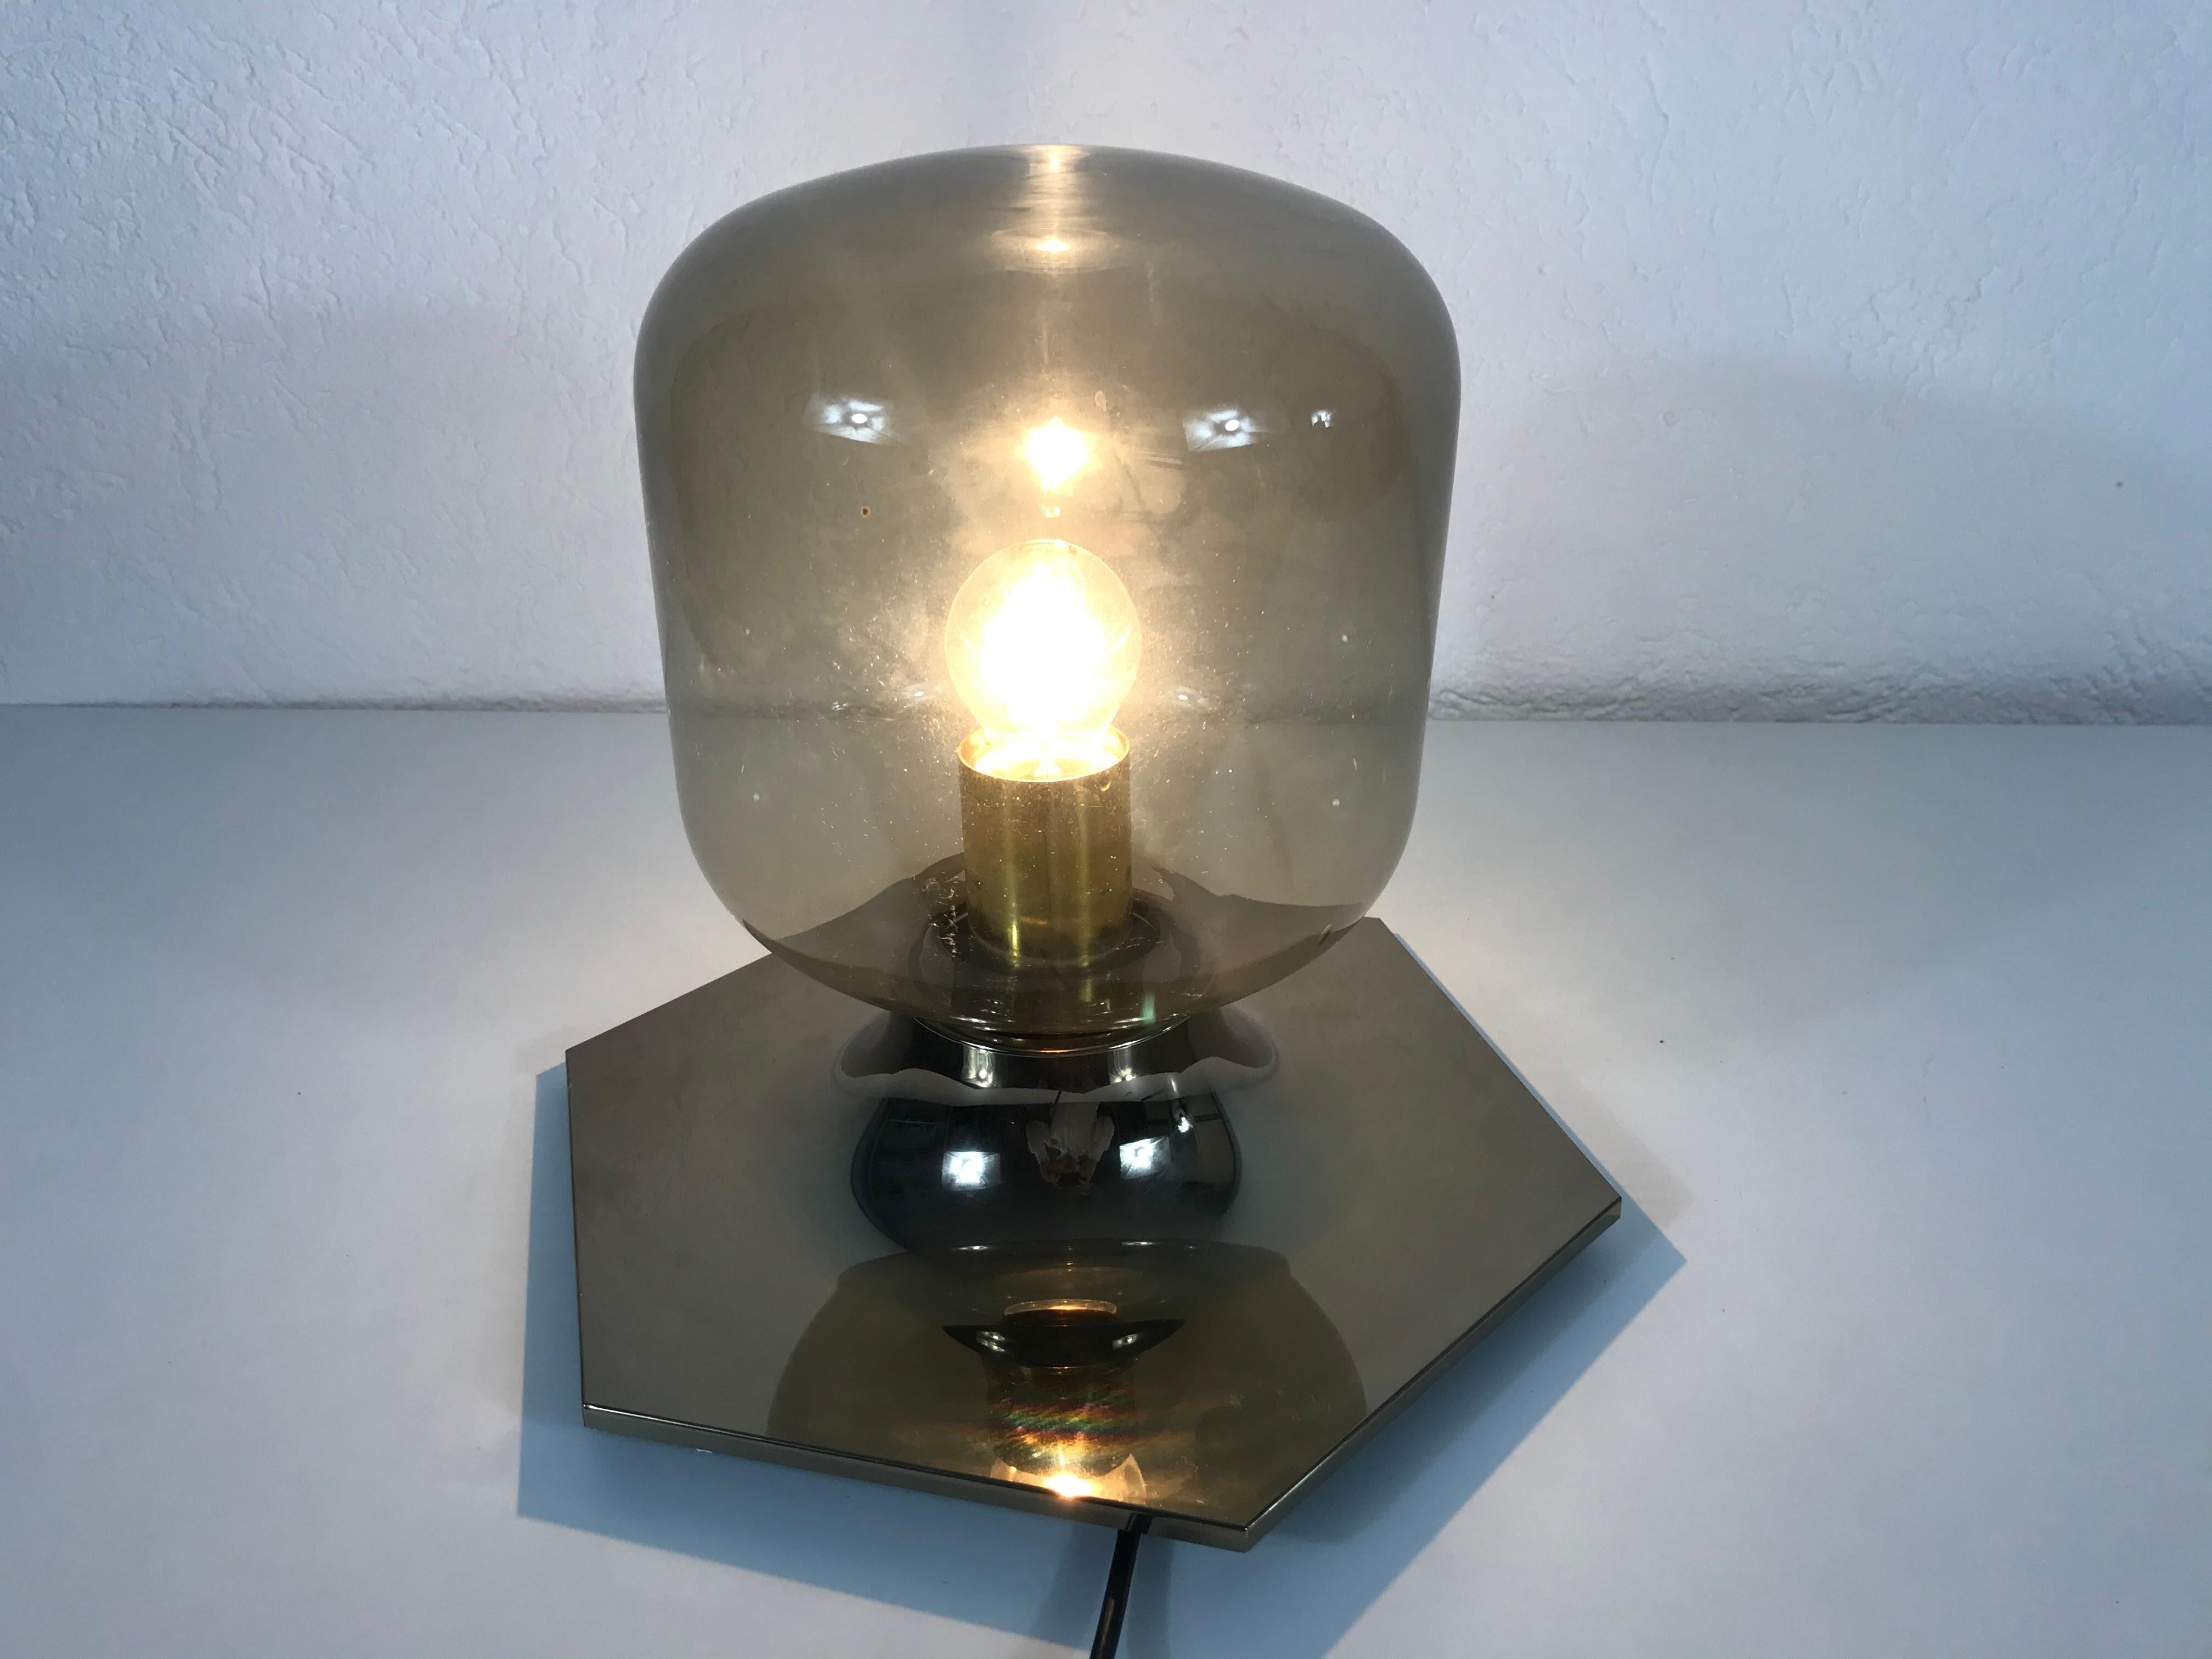 Wall or ceiling light by the Japanese designer Motoko Ishii for the German brand Staff Leuchten. It has a very thin amber glass shade and a brass base.

The lights require one E27 light bulb.